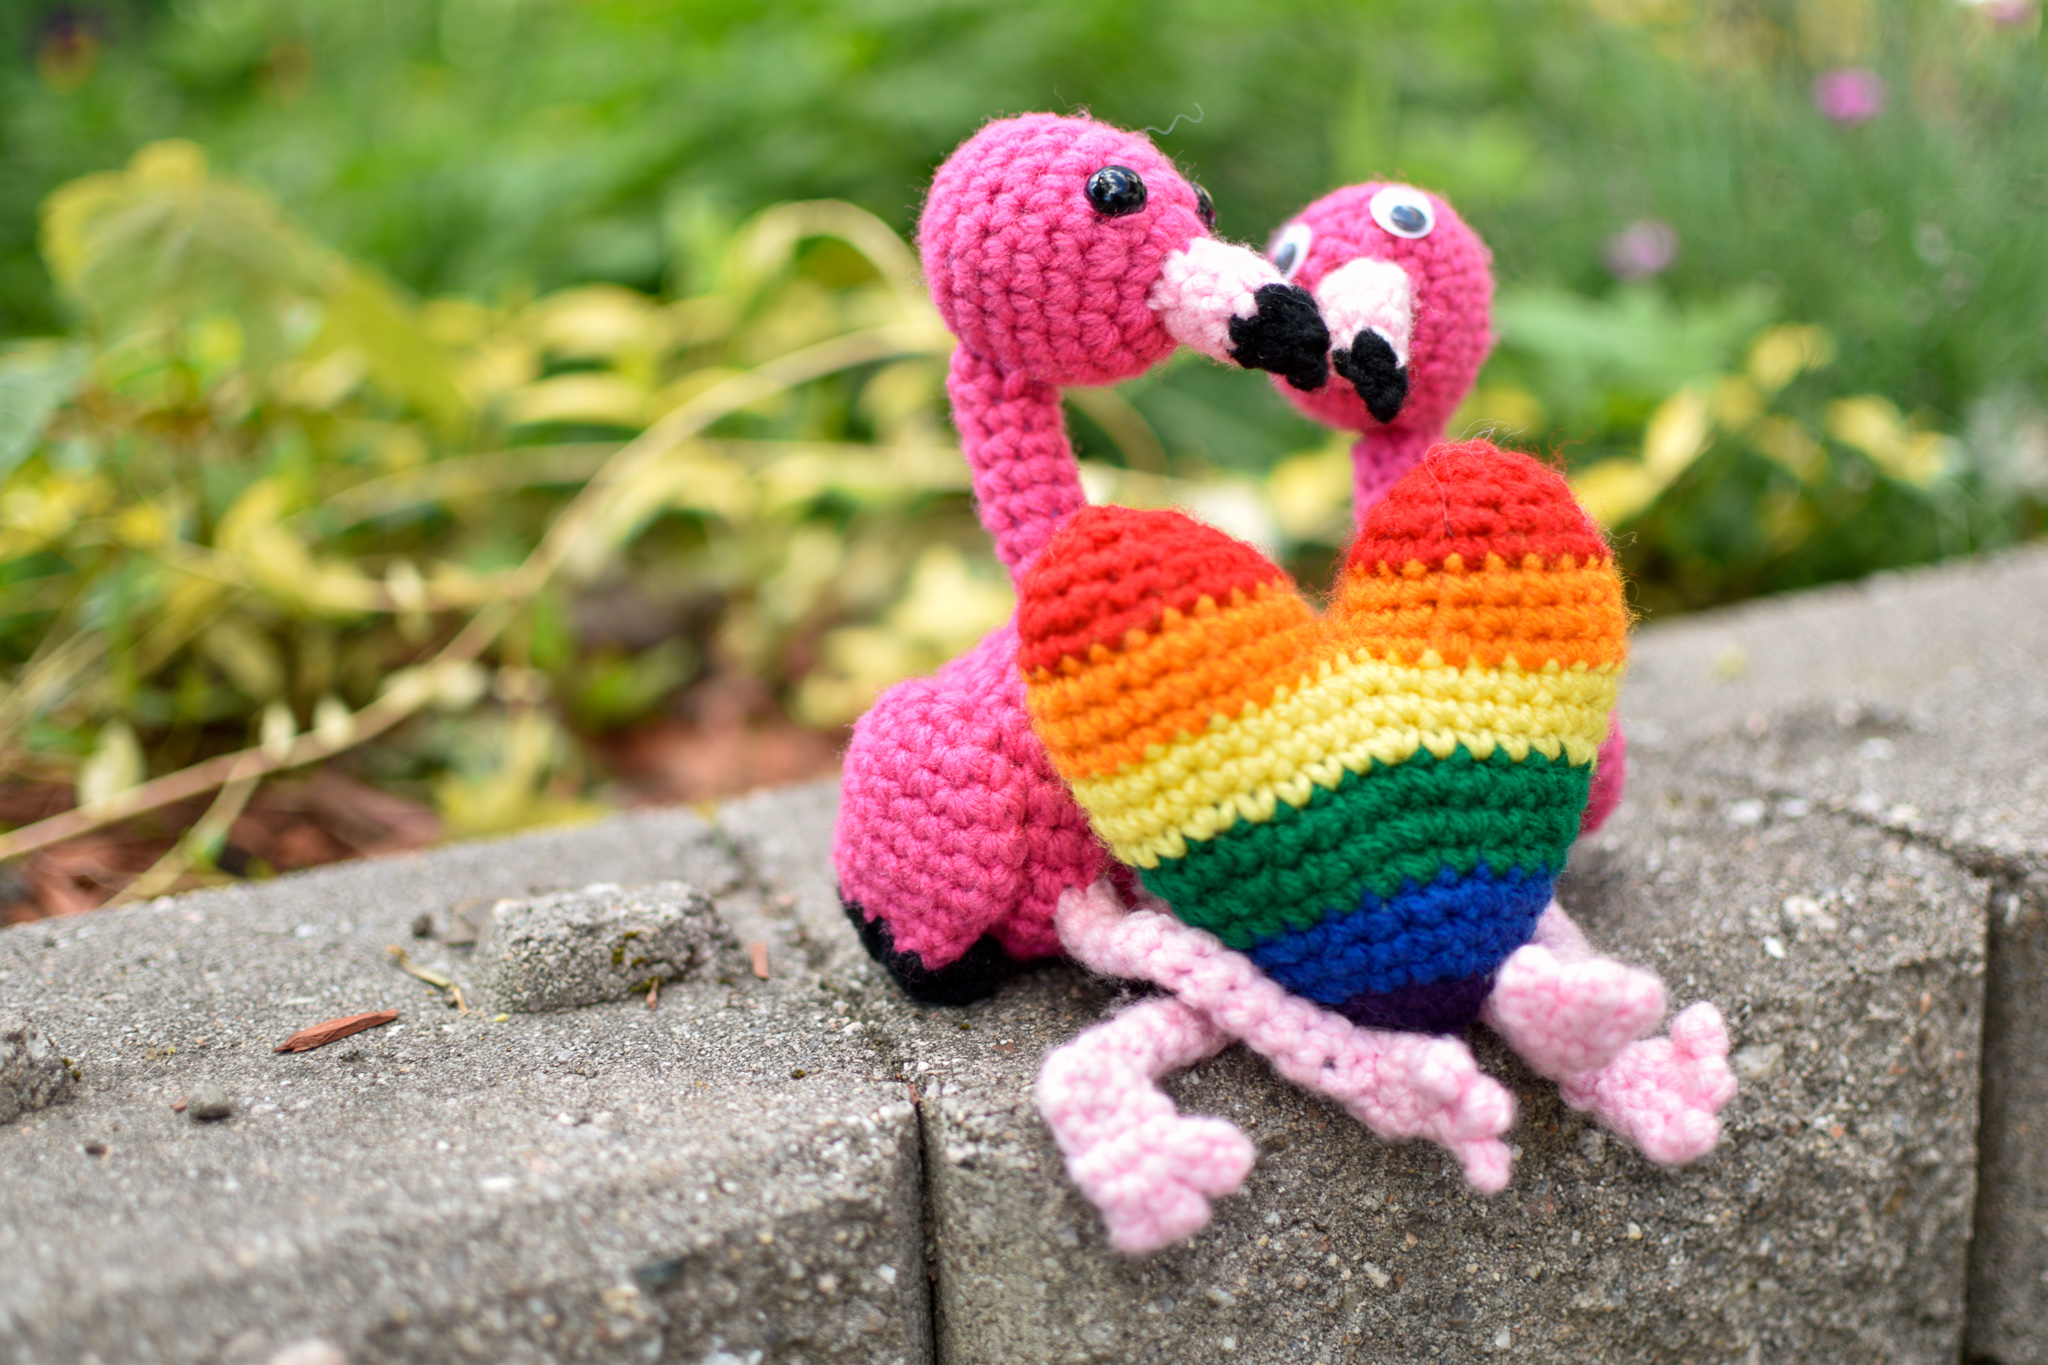 Two stuffed crochet flamingos sitting next to each other on a stone wall with a crochet rainbow heart between then.